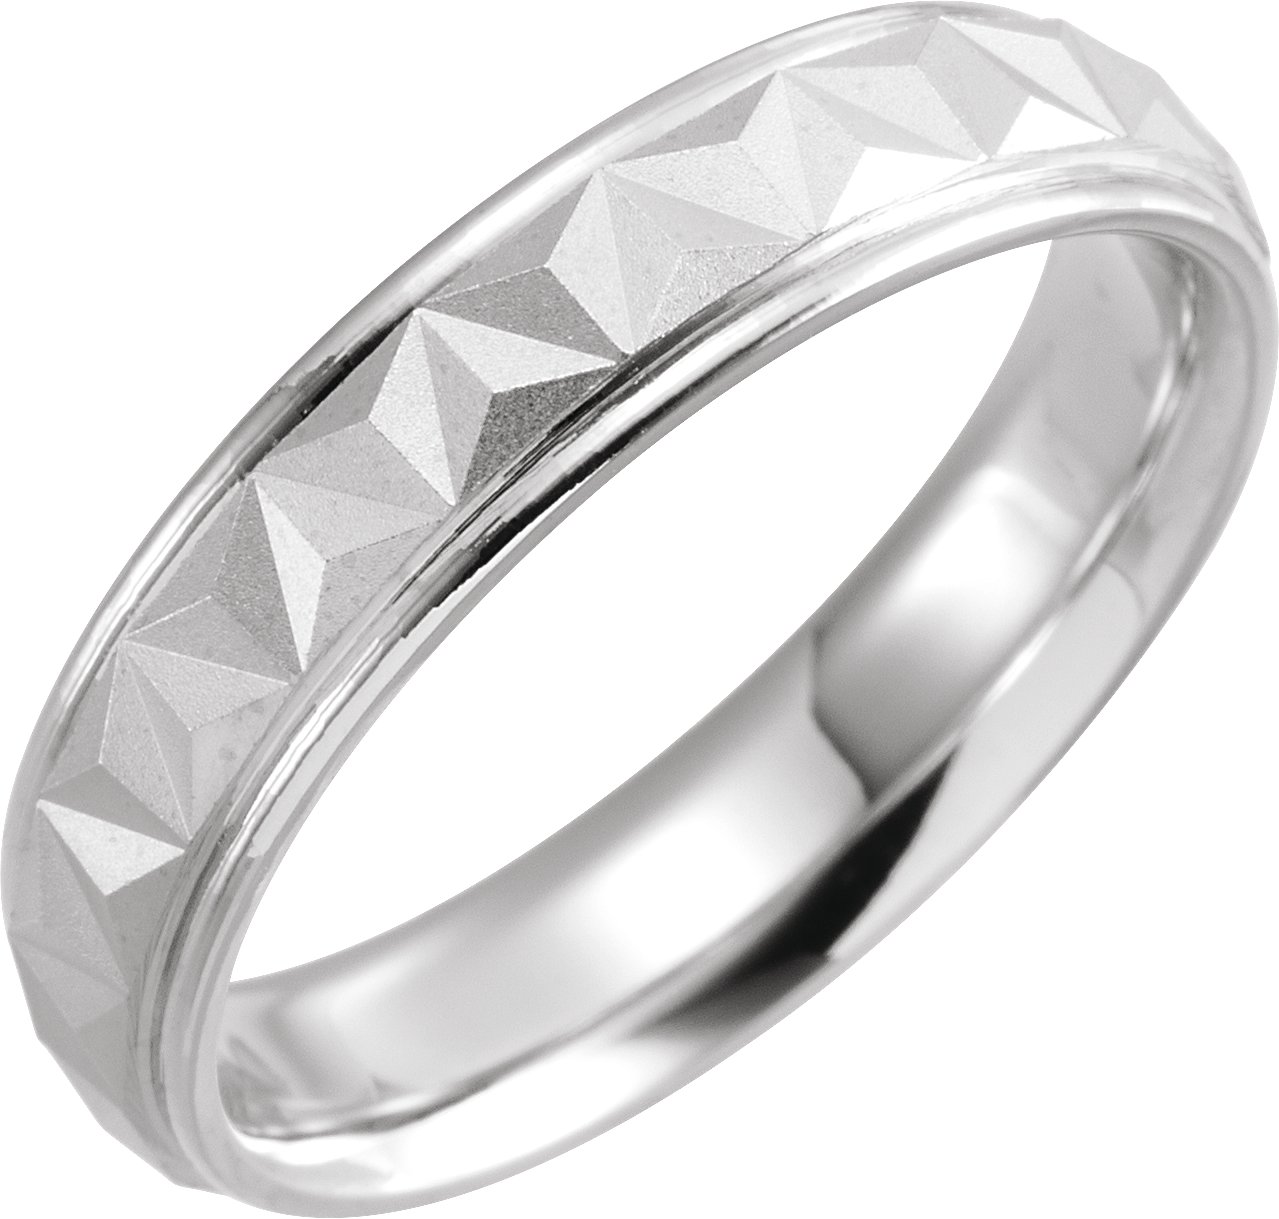 Continuum Sterling Silver 5 mm Geometric Band with Matte/Polished Finish Size 4